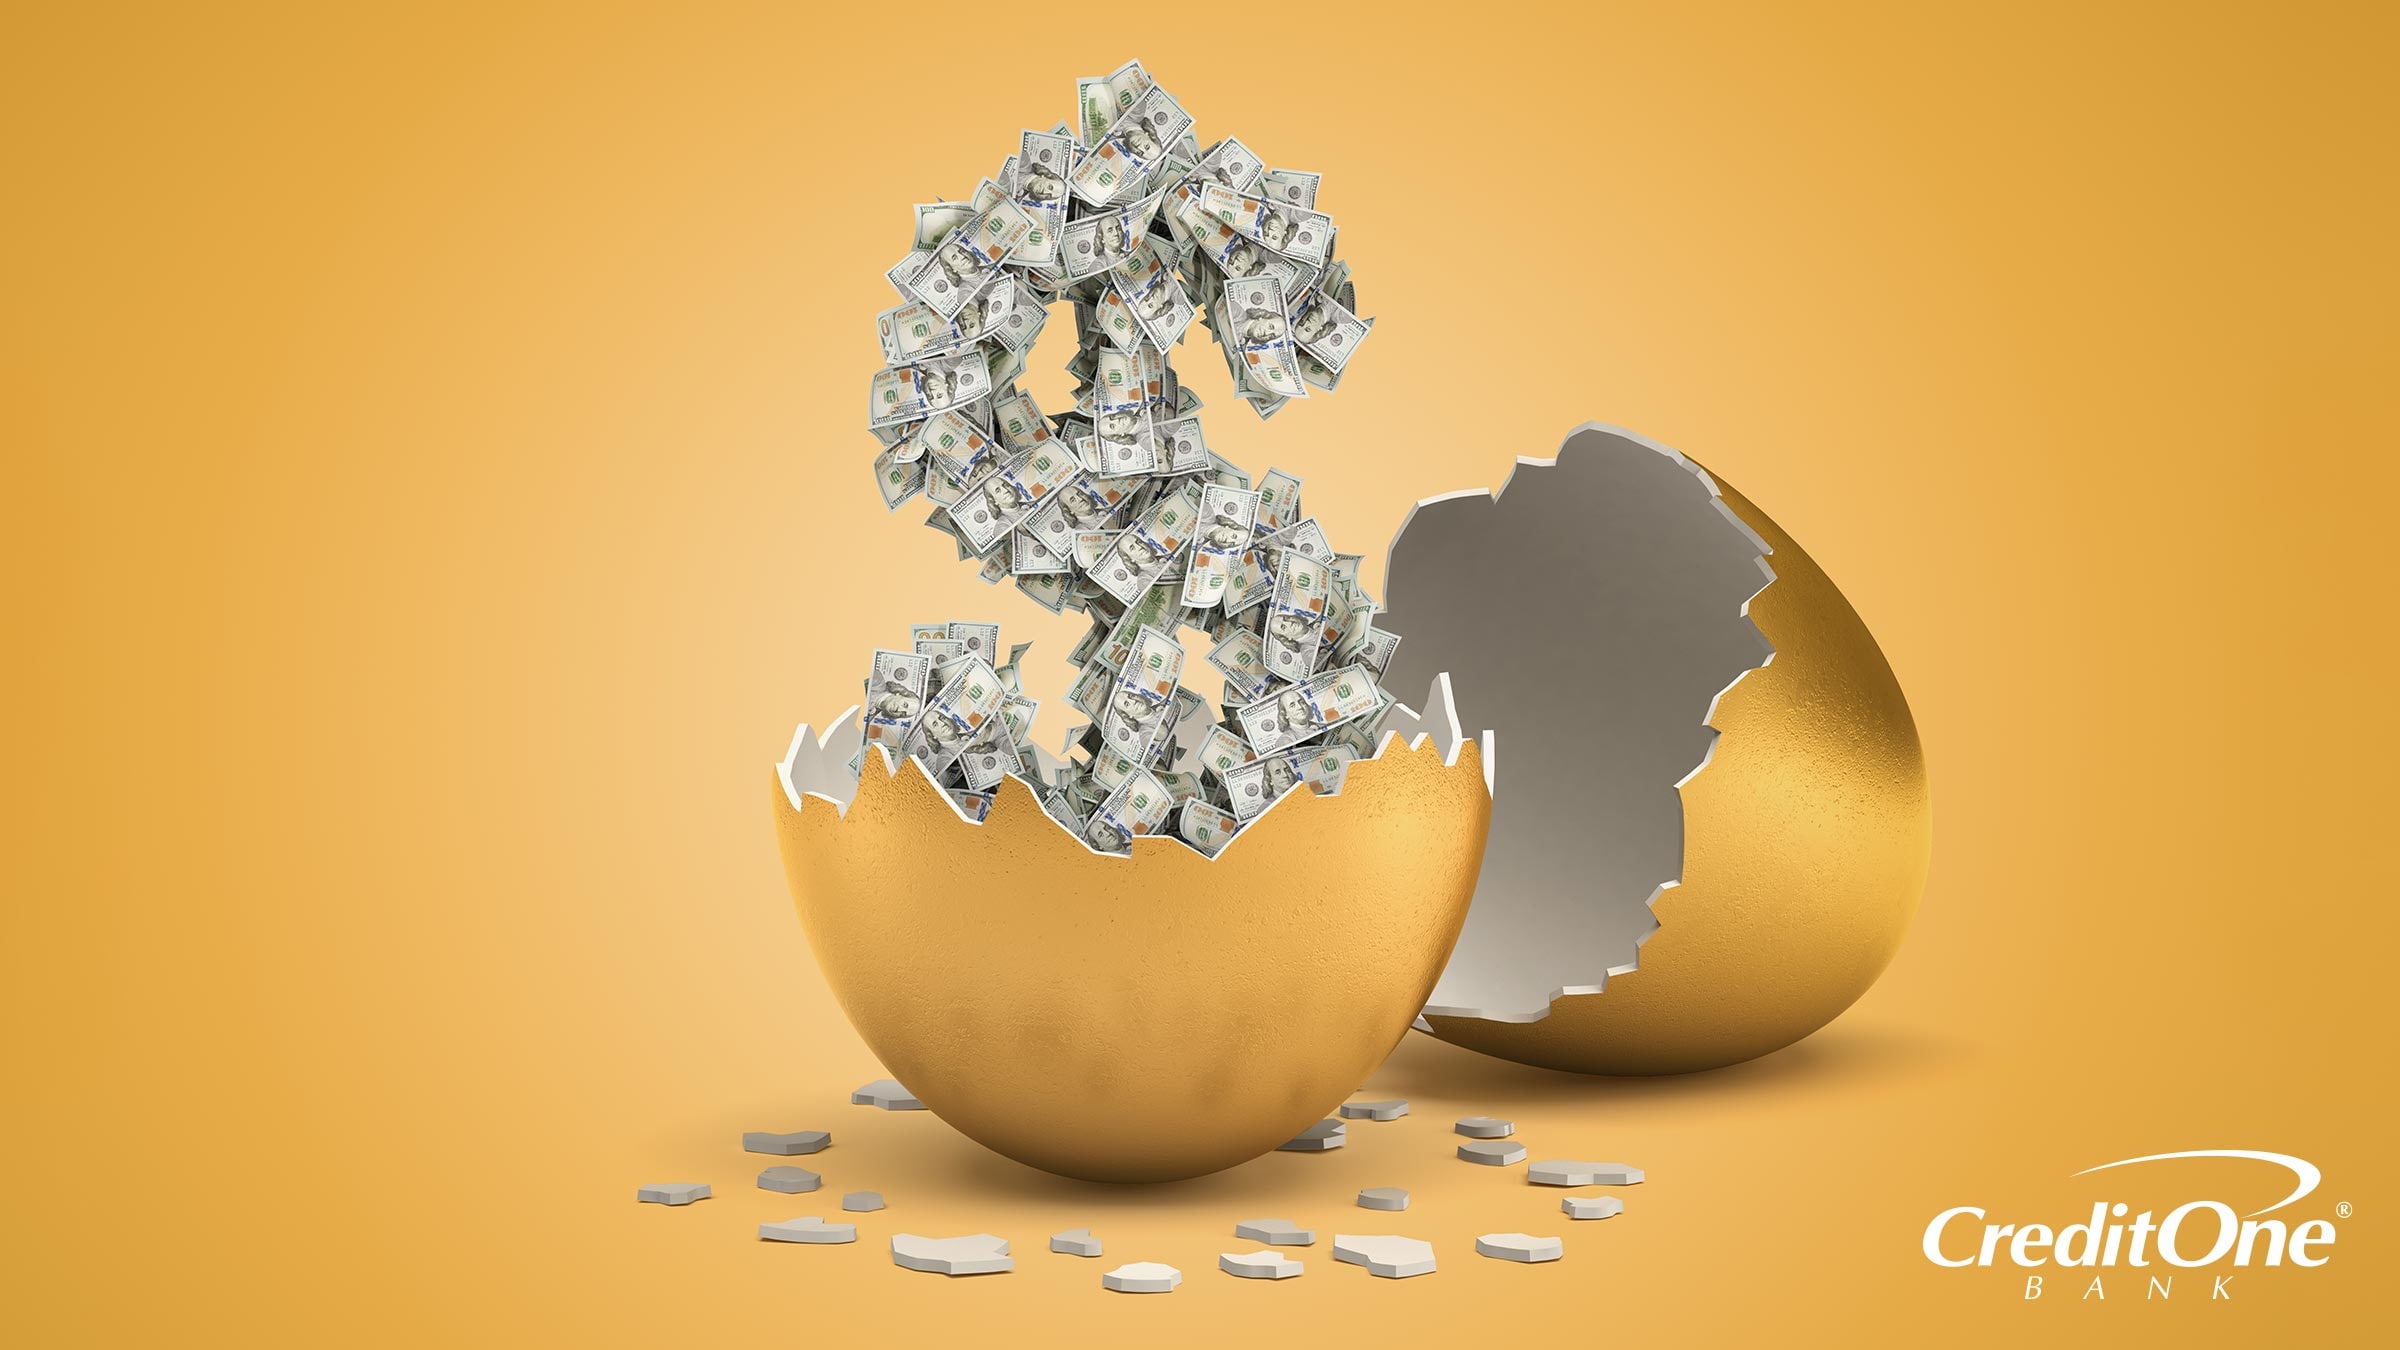 An egg hatches, revealing a dollar sign of cash inside signifying the maturity date of a certificate of deposit.